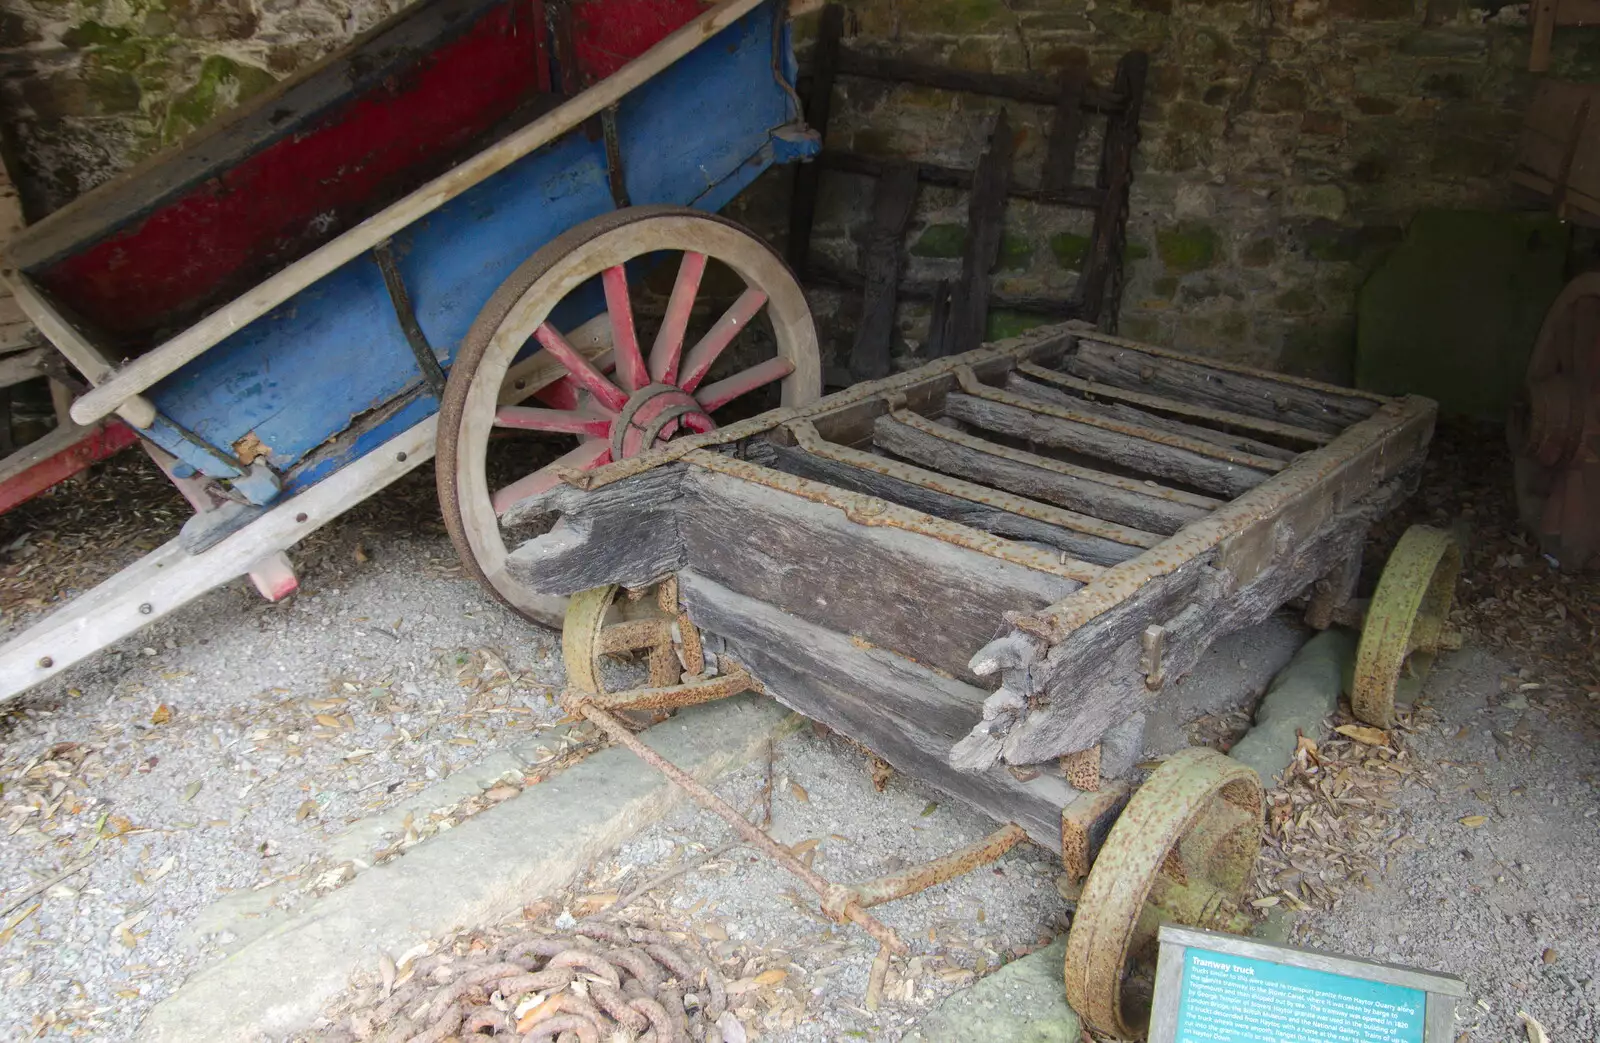 An ancient trolley or cart, from Chagford Lido and a Trip to Parke, Bovey Tracey, Devon - 25th May 2019